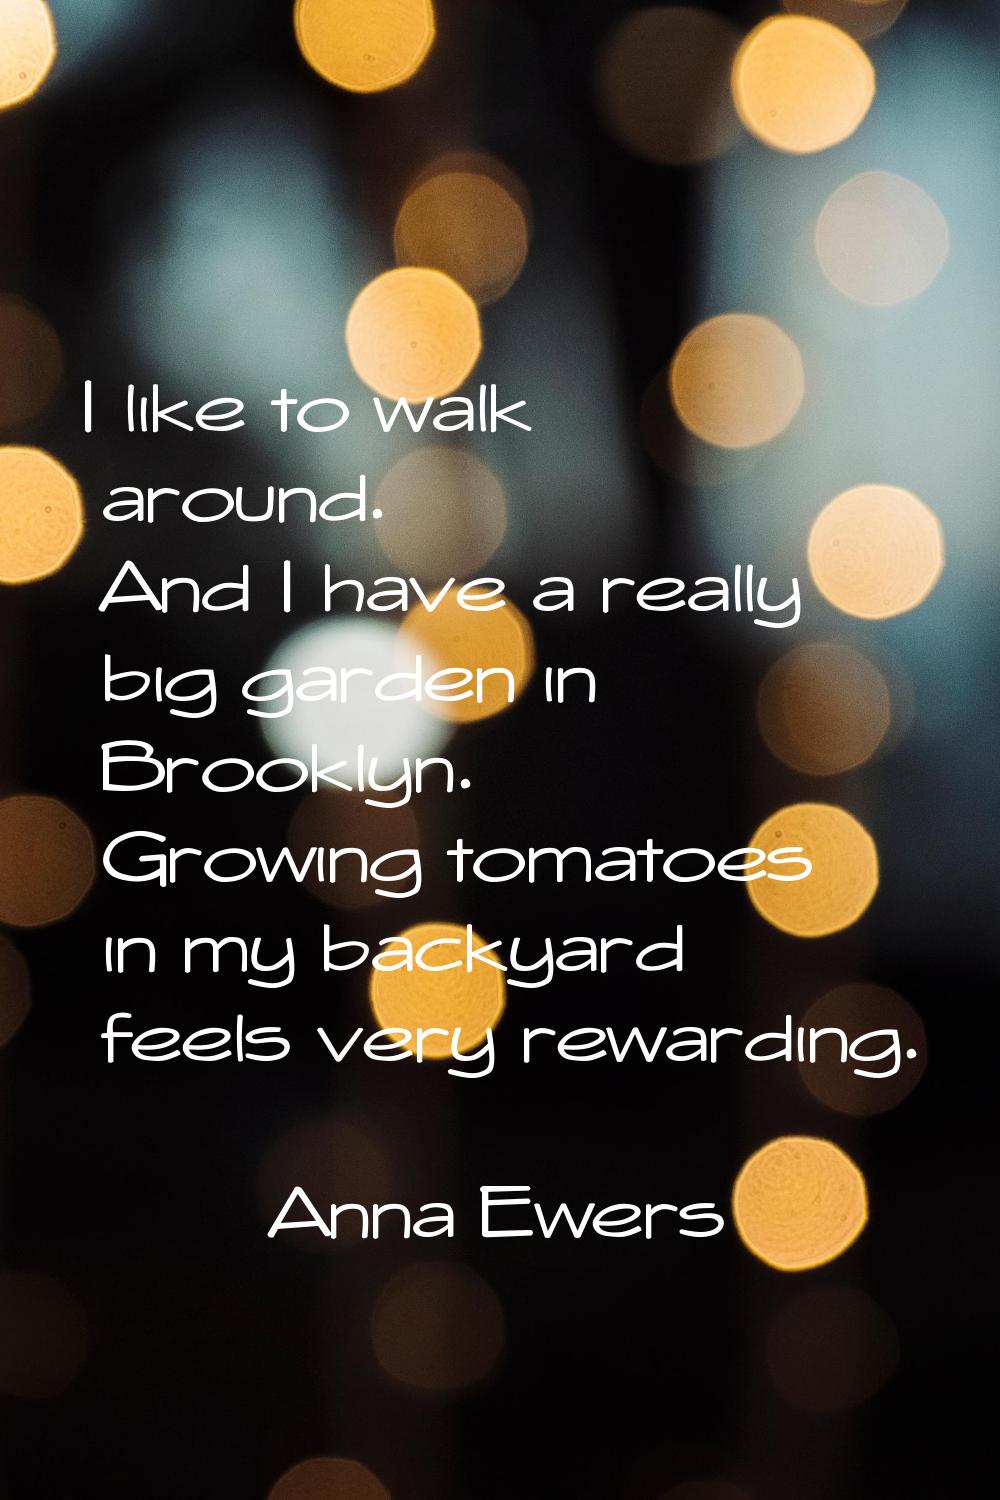 I like to walk around. And I have a really big garden in Brooklyn. Growing tomatoes in my backyard 